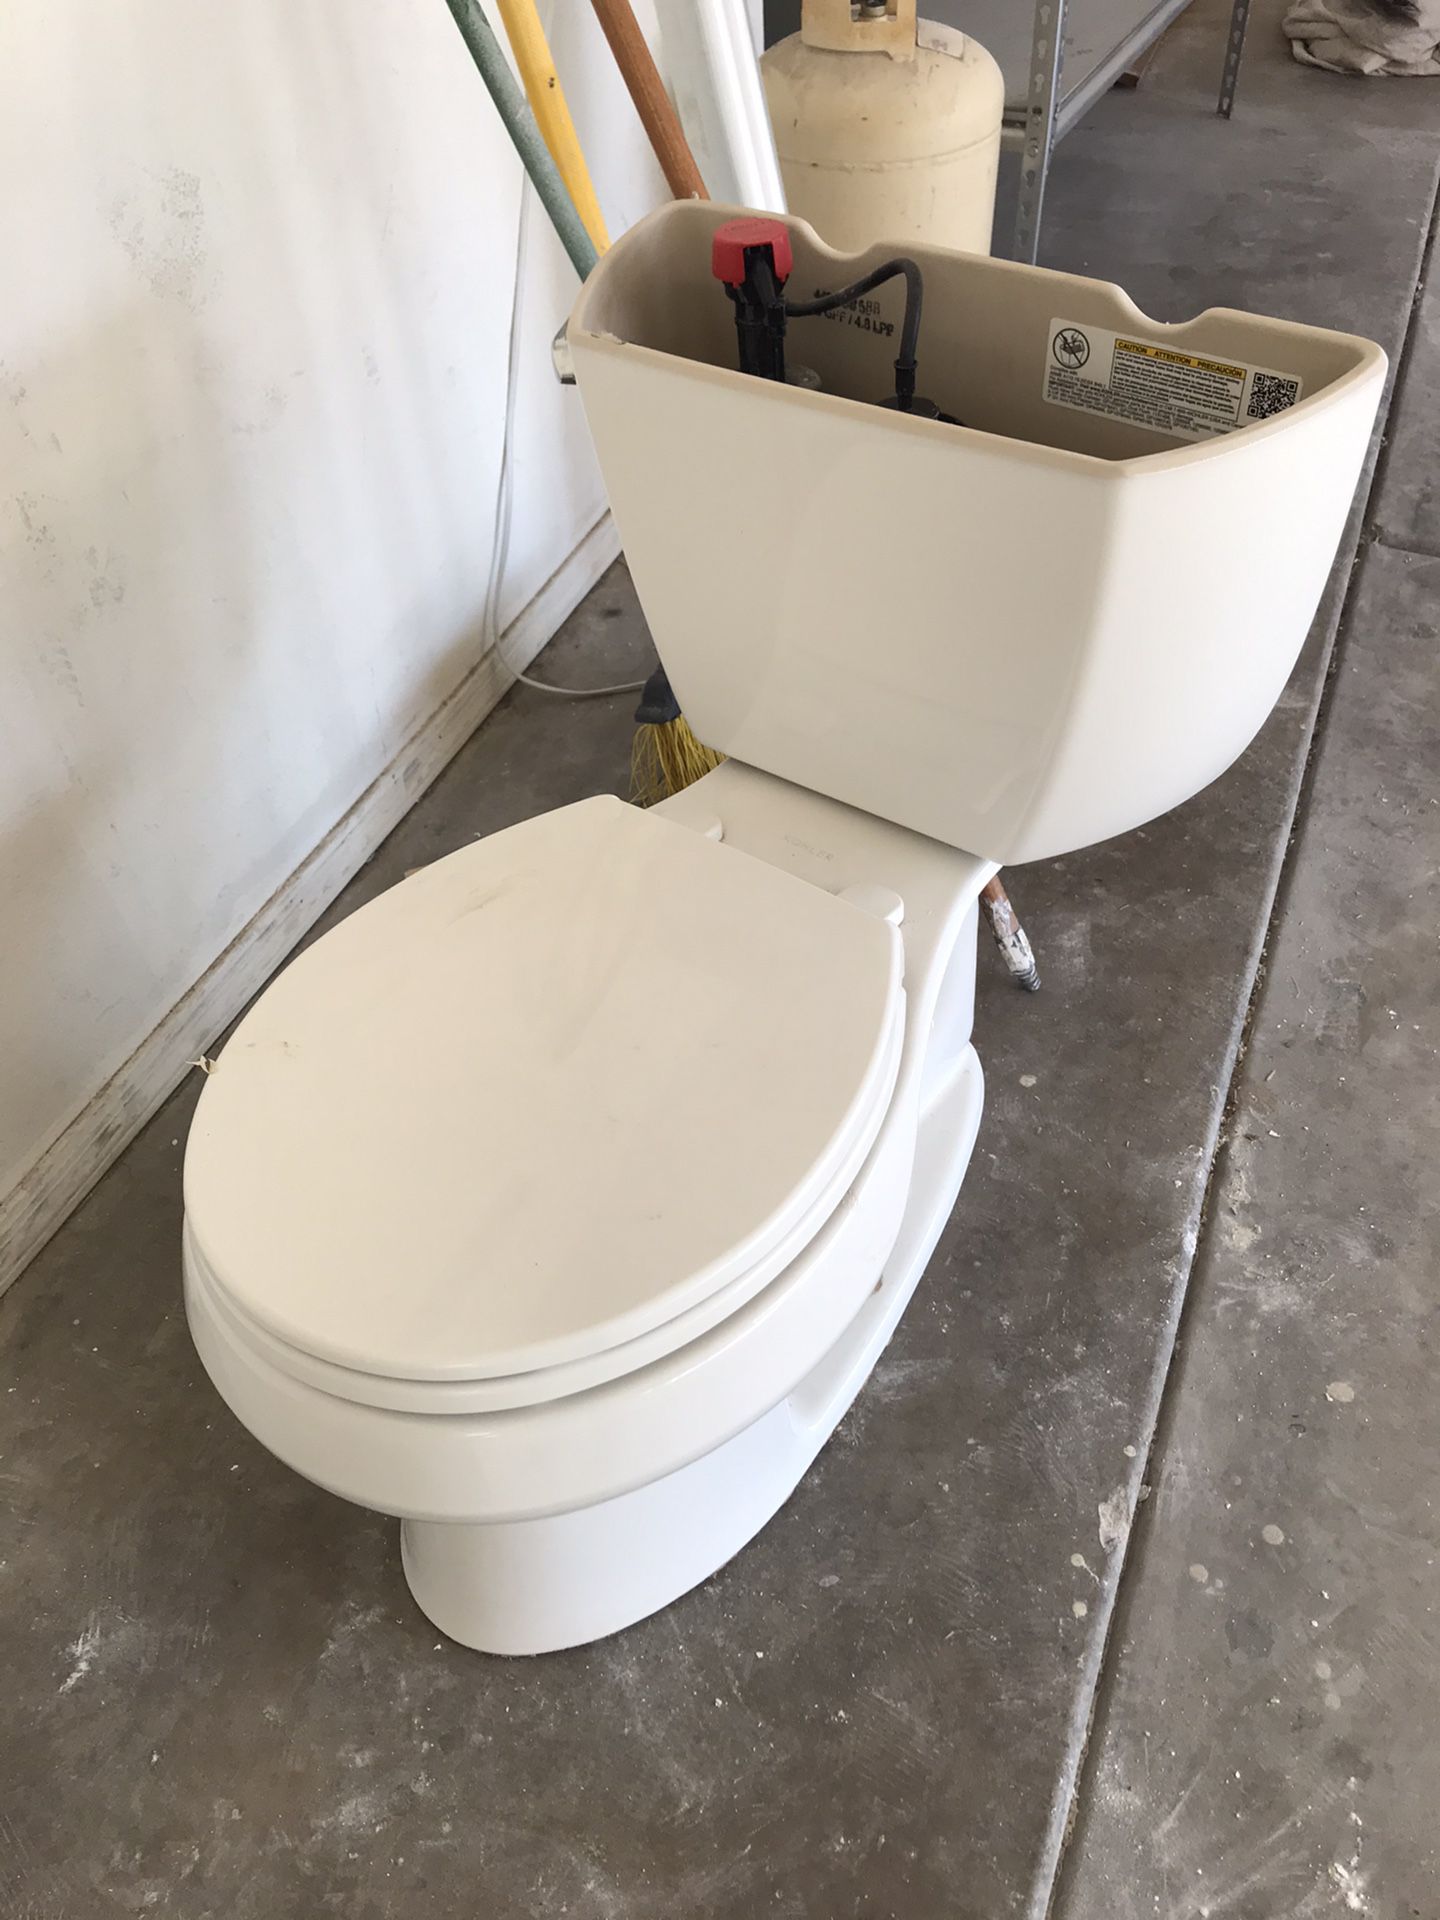 Perfectly Functioning Toilet!